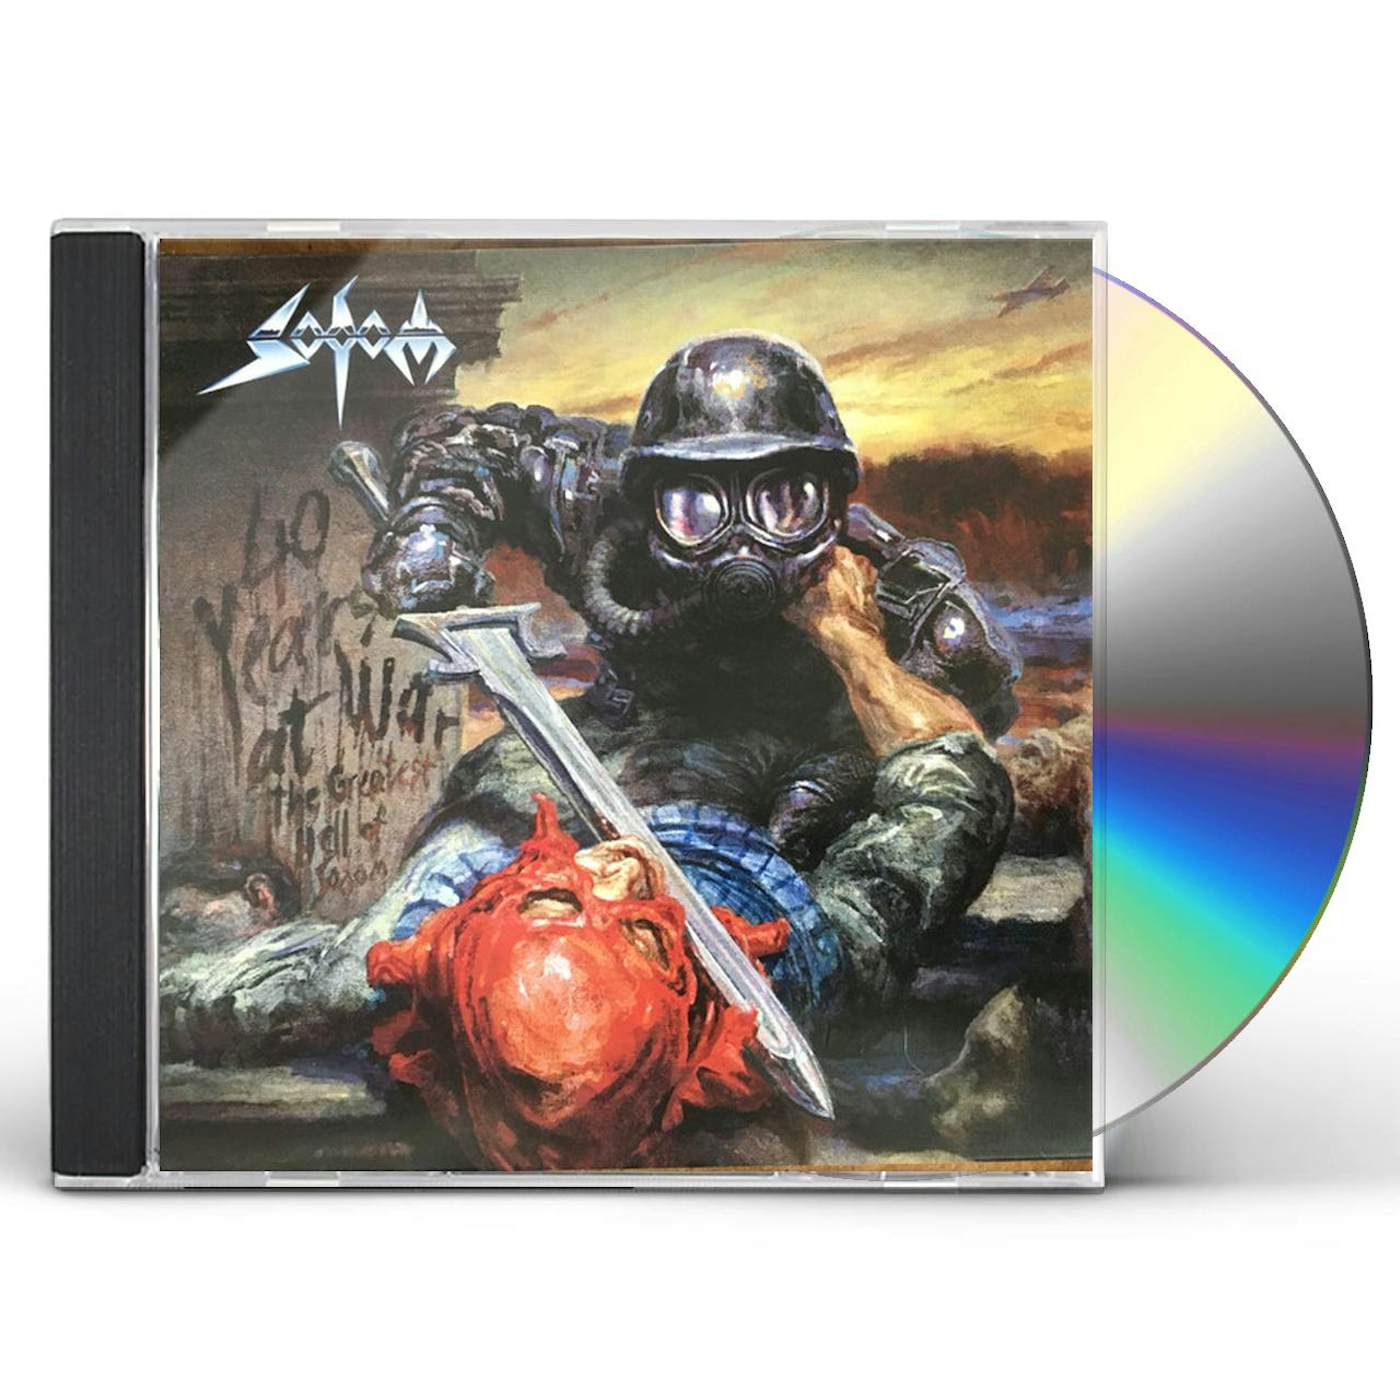 40 YEARS AT WAR - THE GREATEST HELL OF SODOM CD